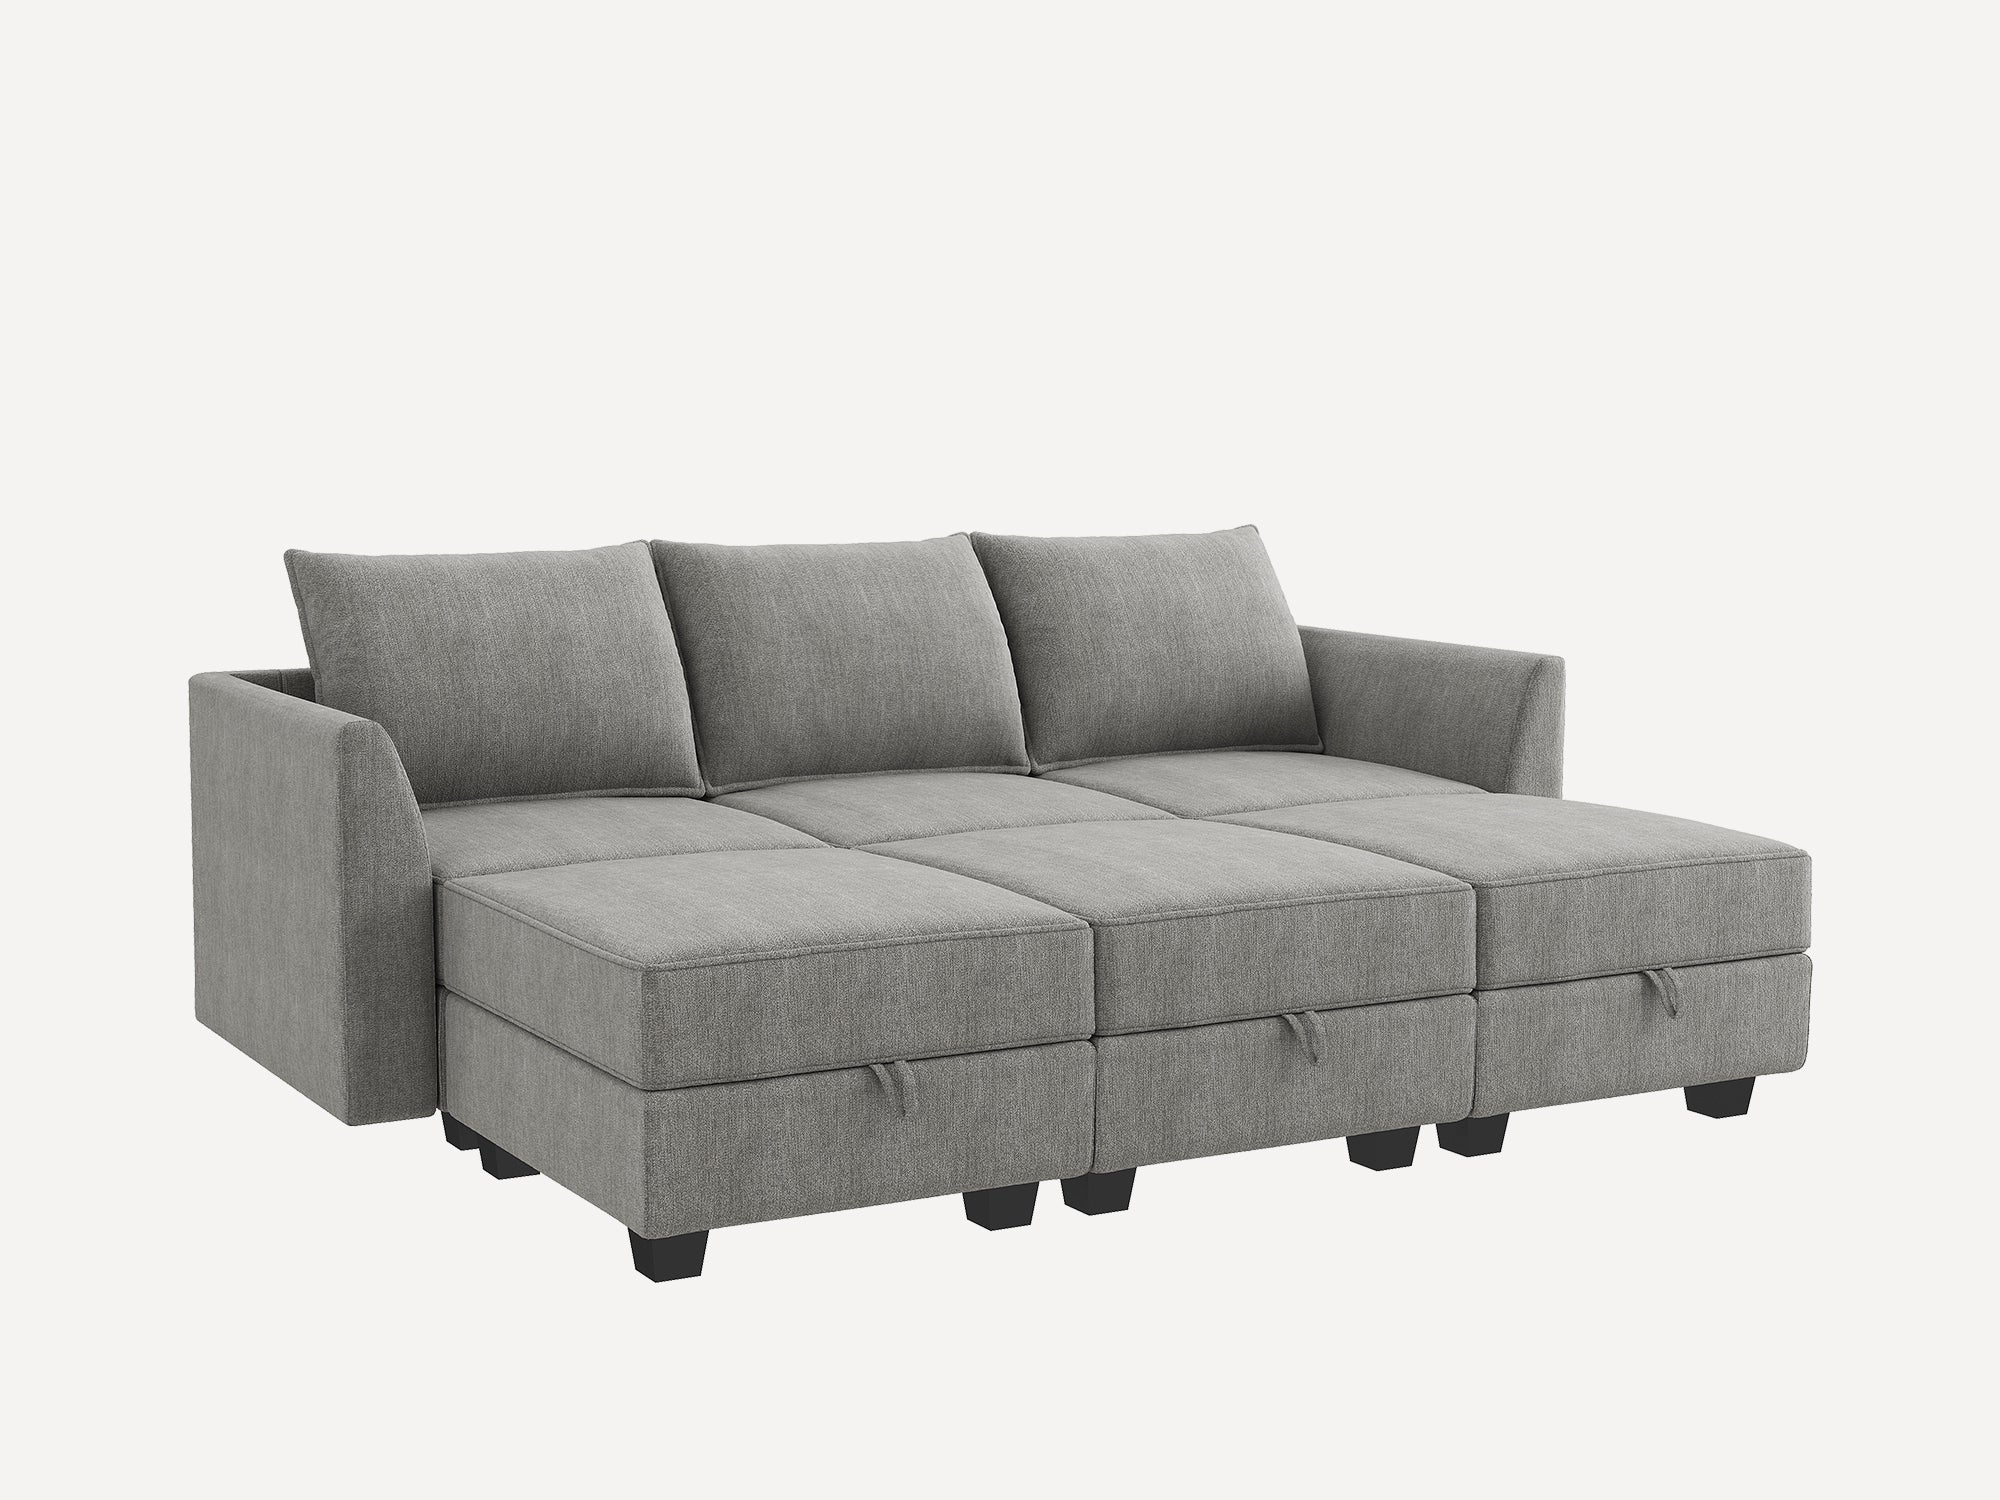 3 Seaters Modular Sectional Sofa Couch